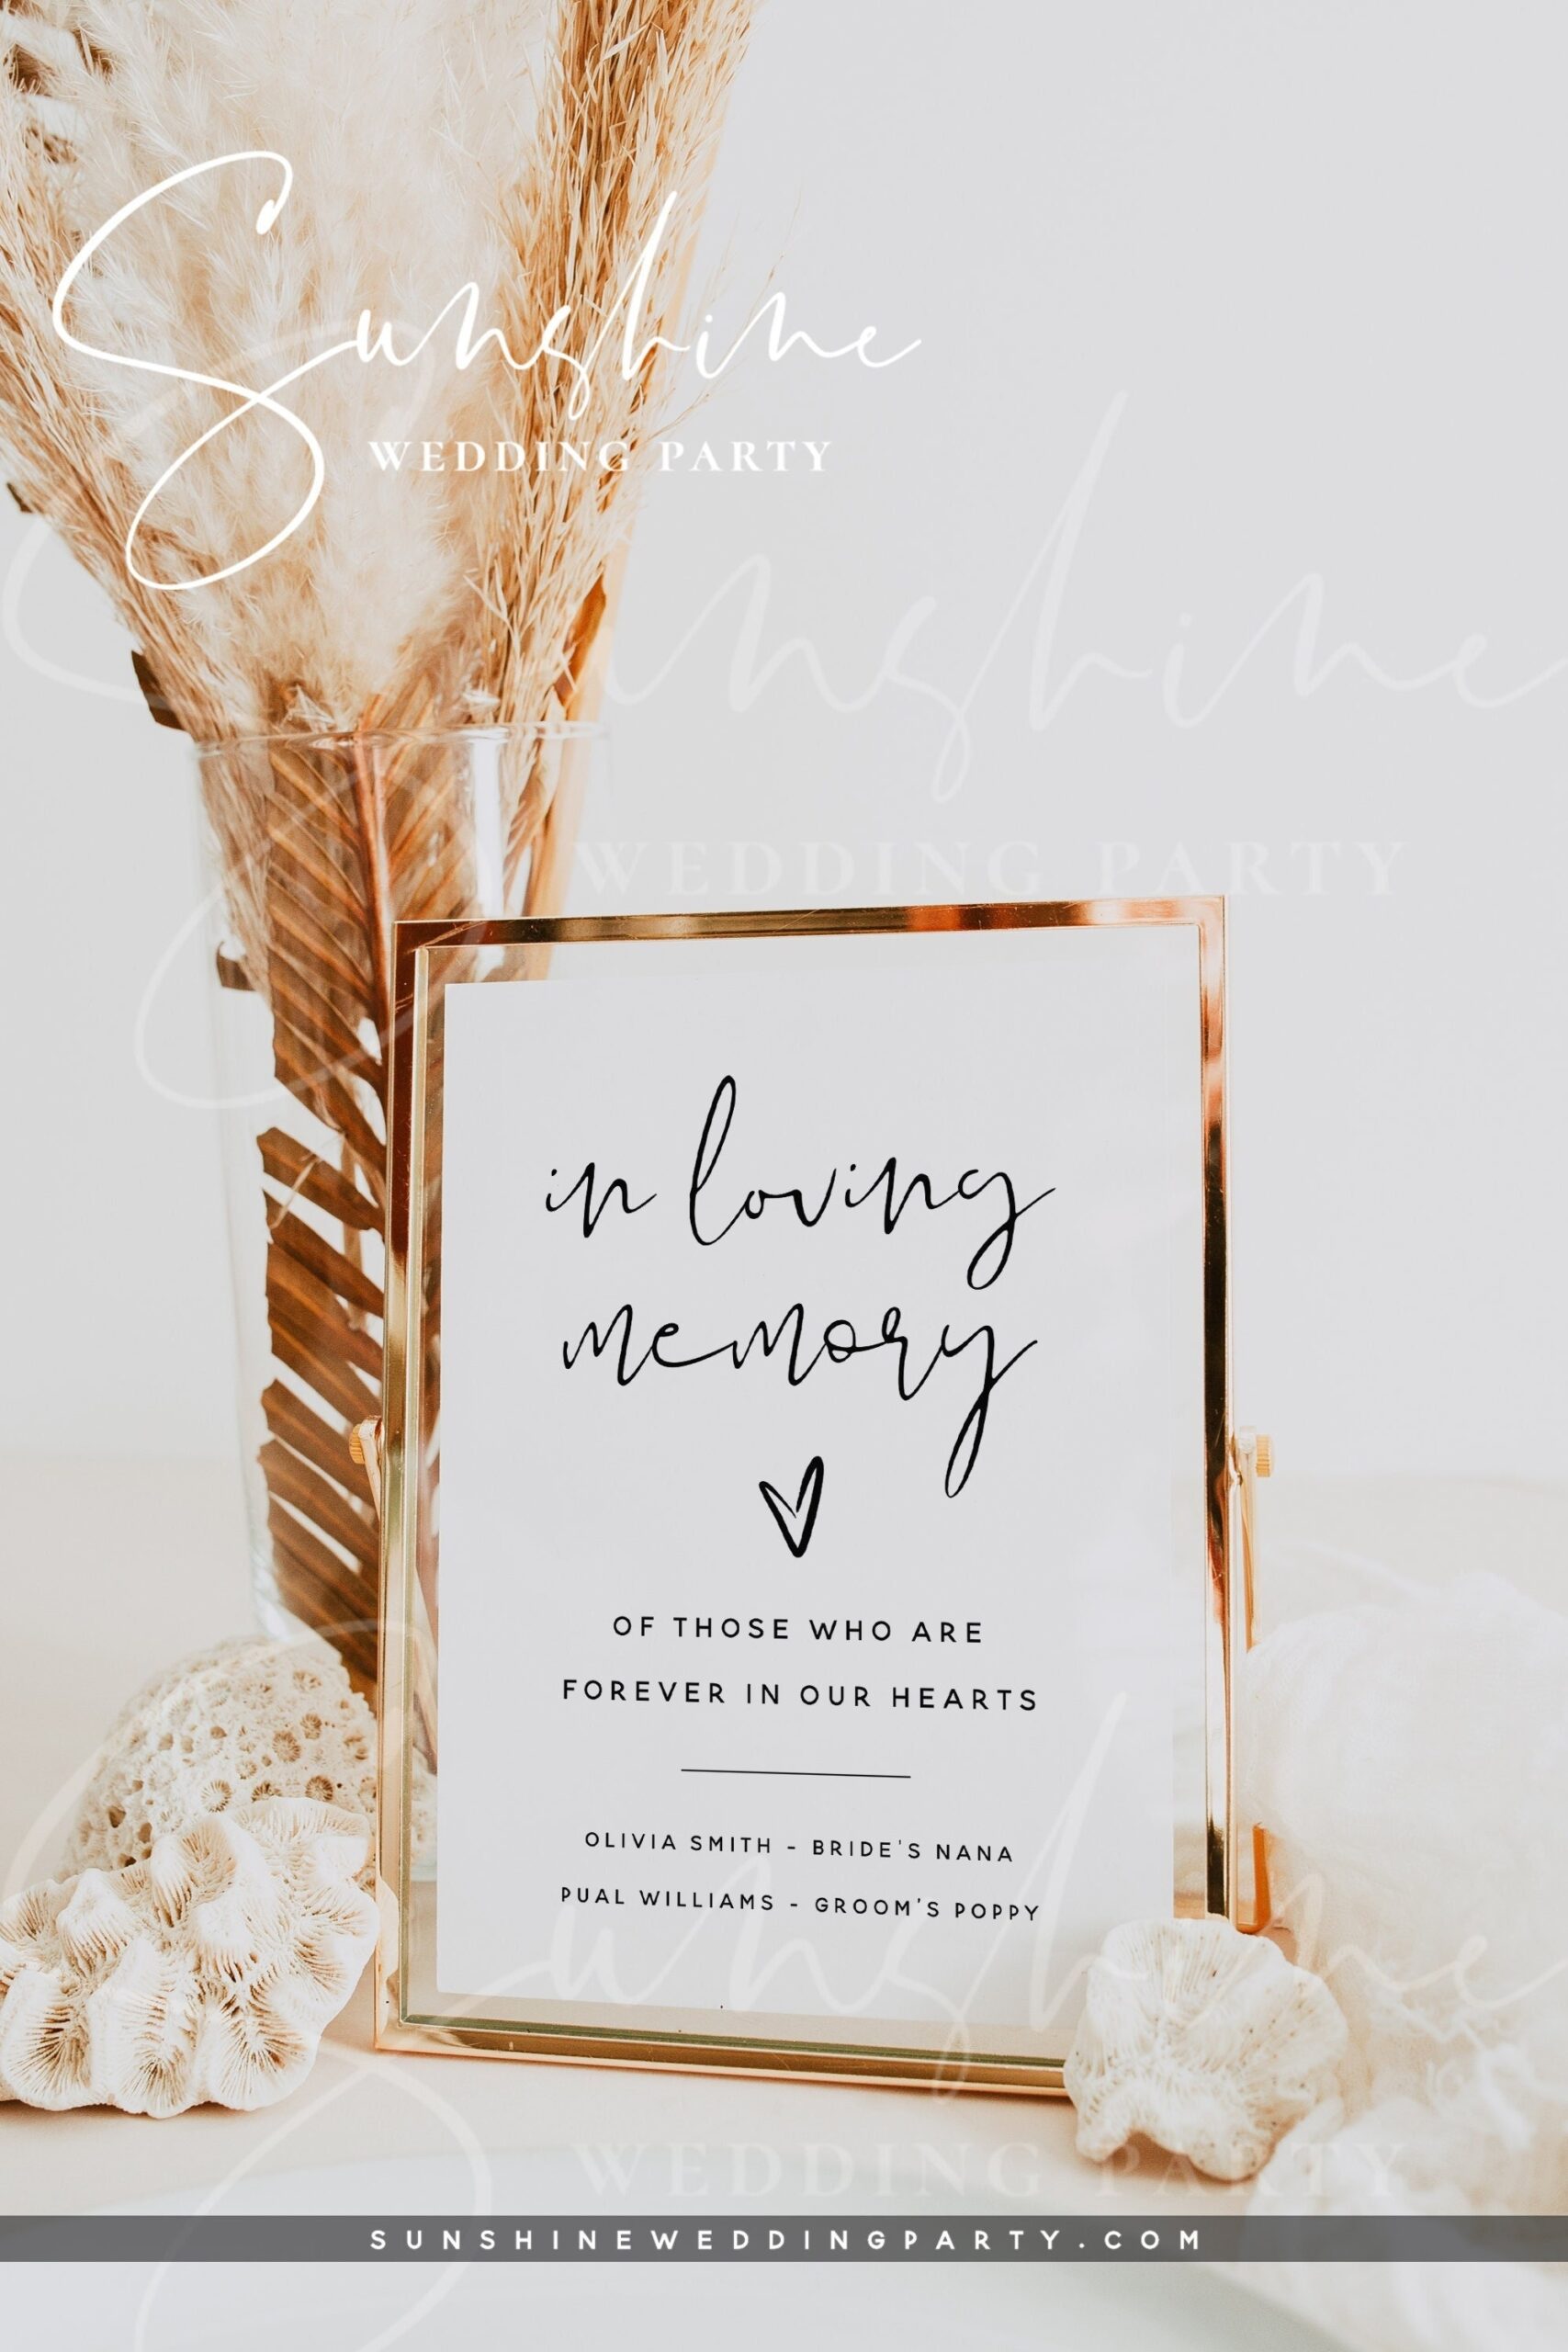 In Loving Memory Sign Template Modern Wedding Sign DIY Wedding Memory Sign Template In Loving Memory Sign Printable Instant Download M8 Etsy